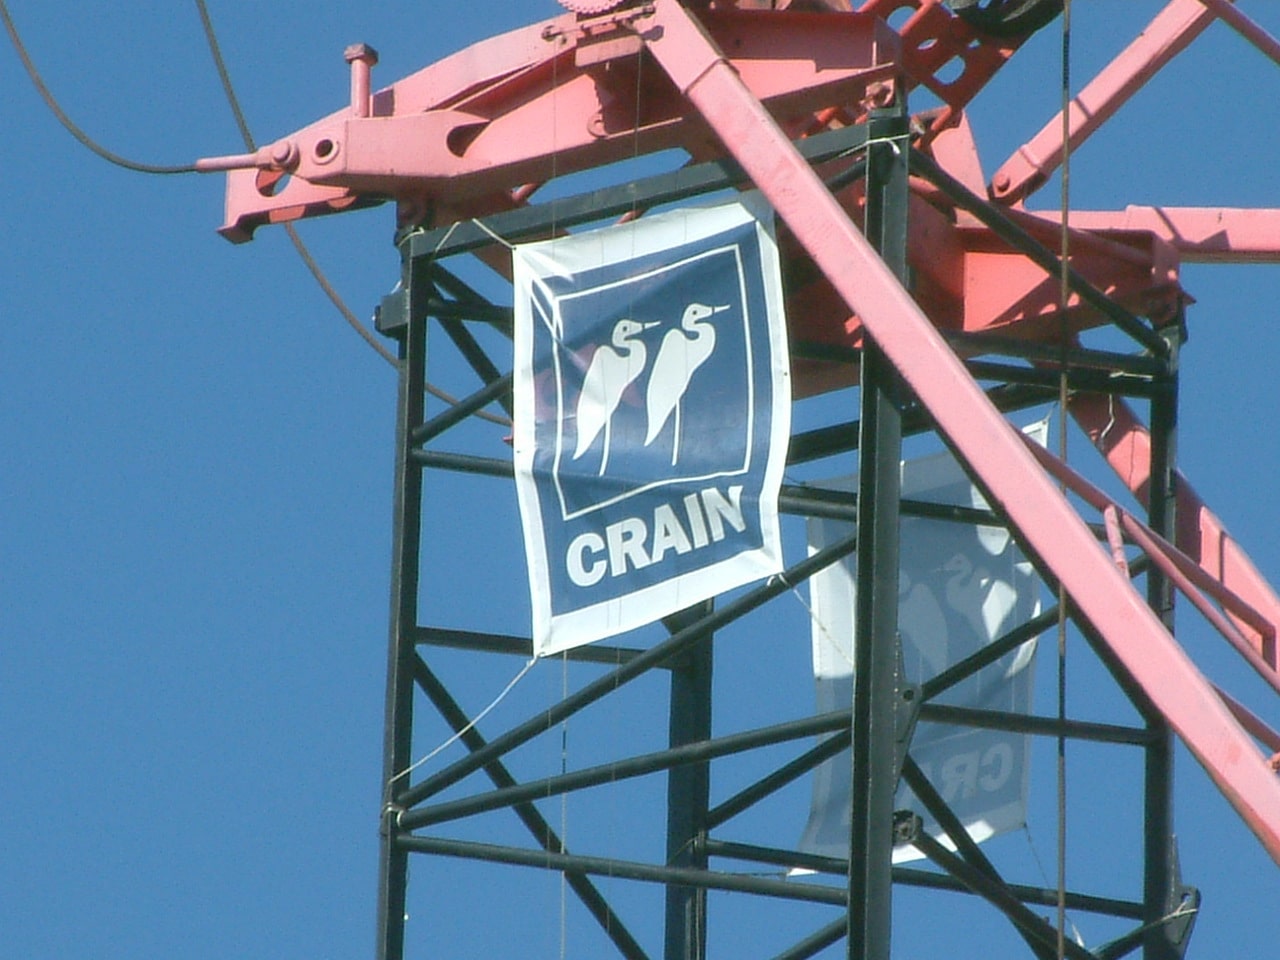 Crain Construction banner waving in the wind off scaffolding in the sky